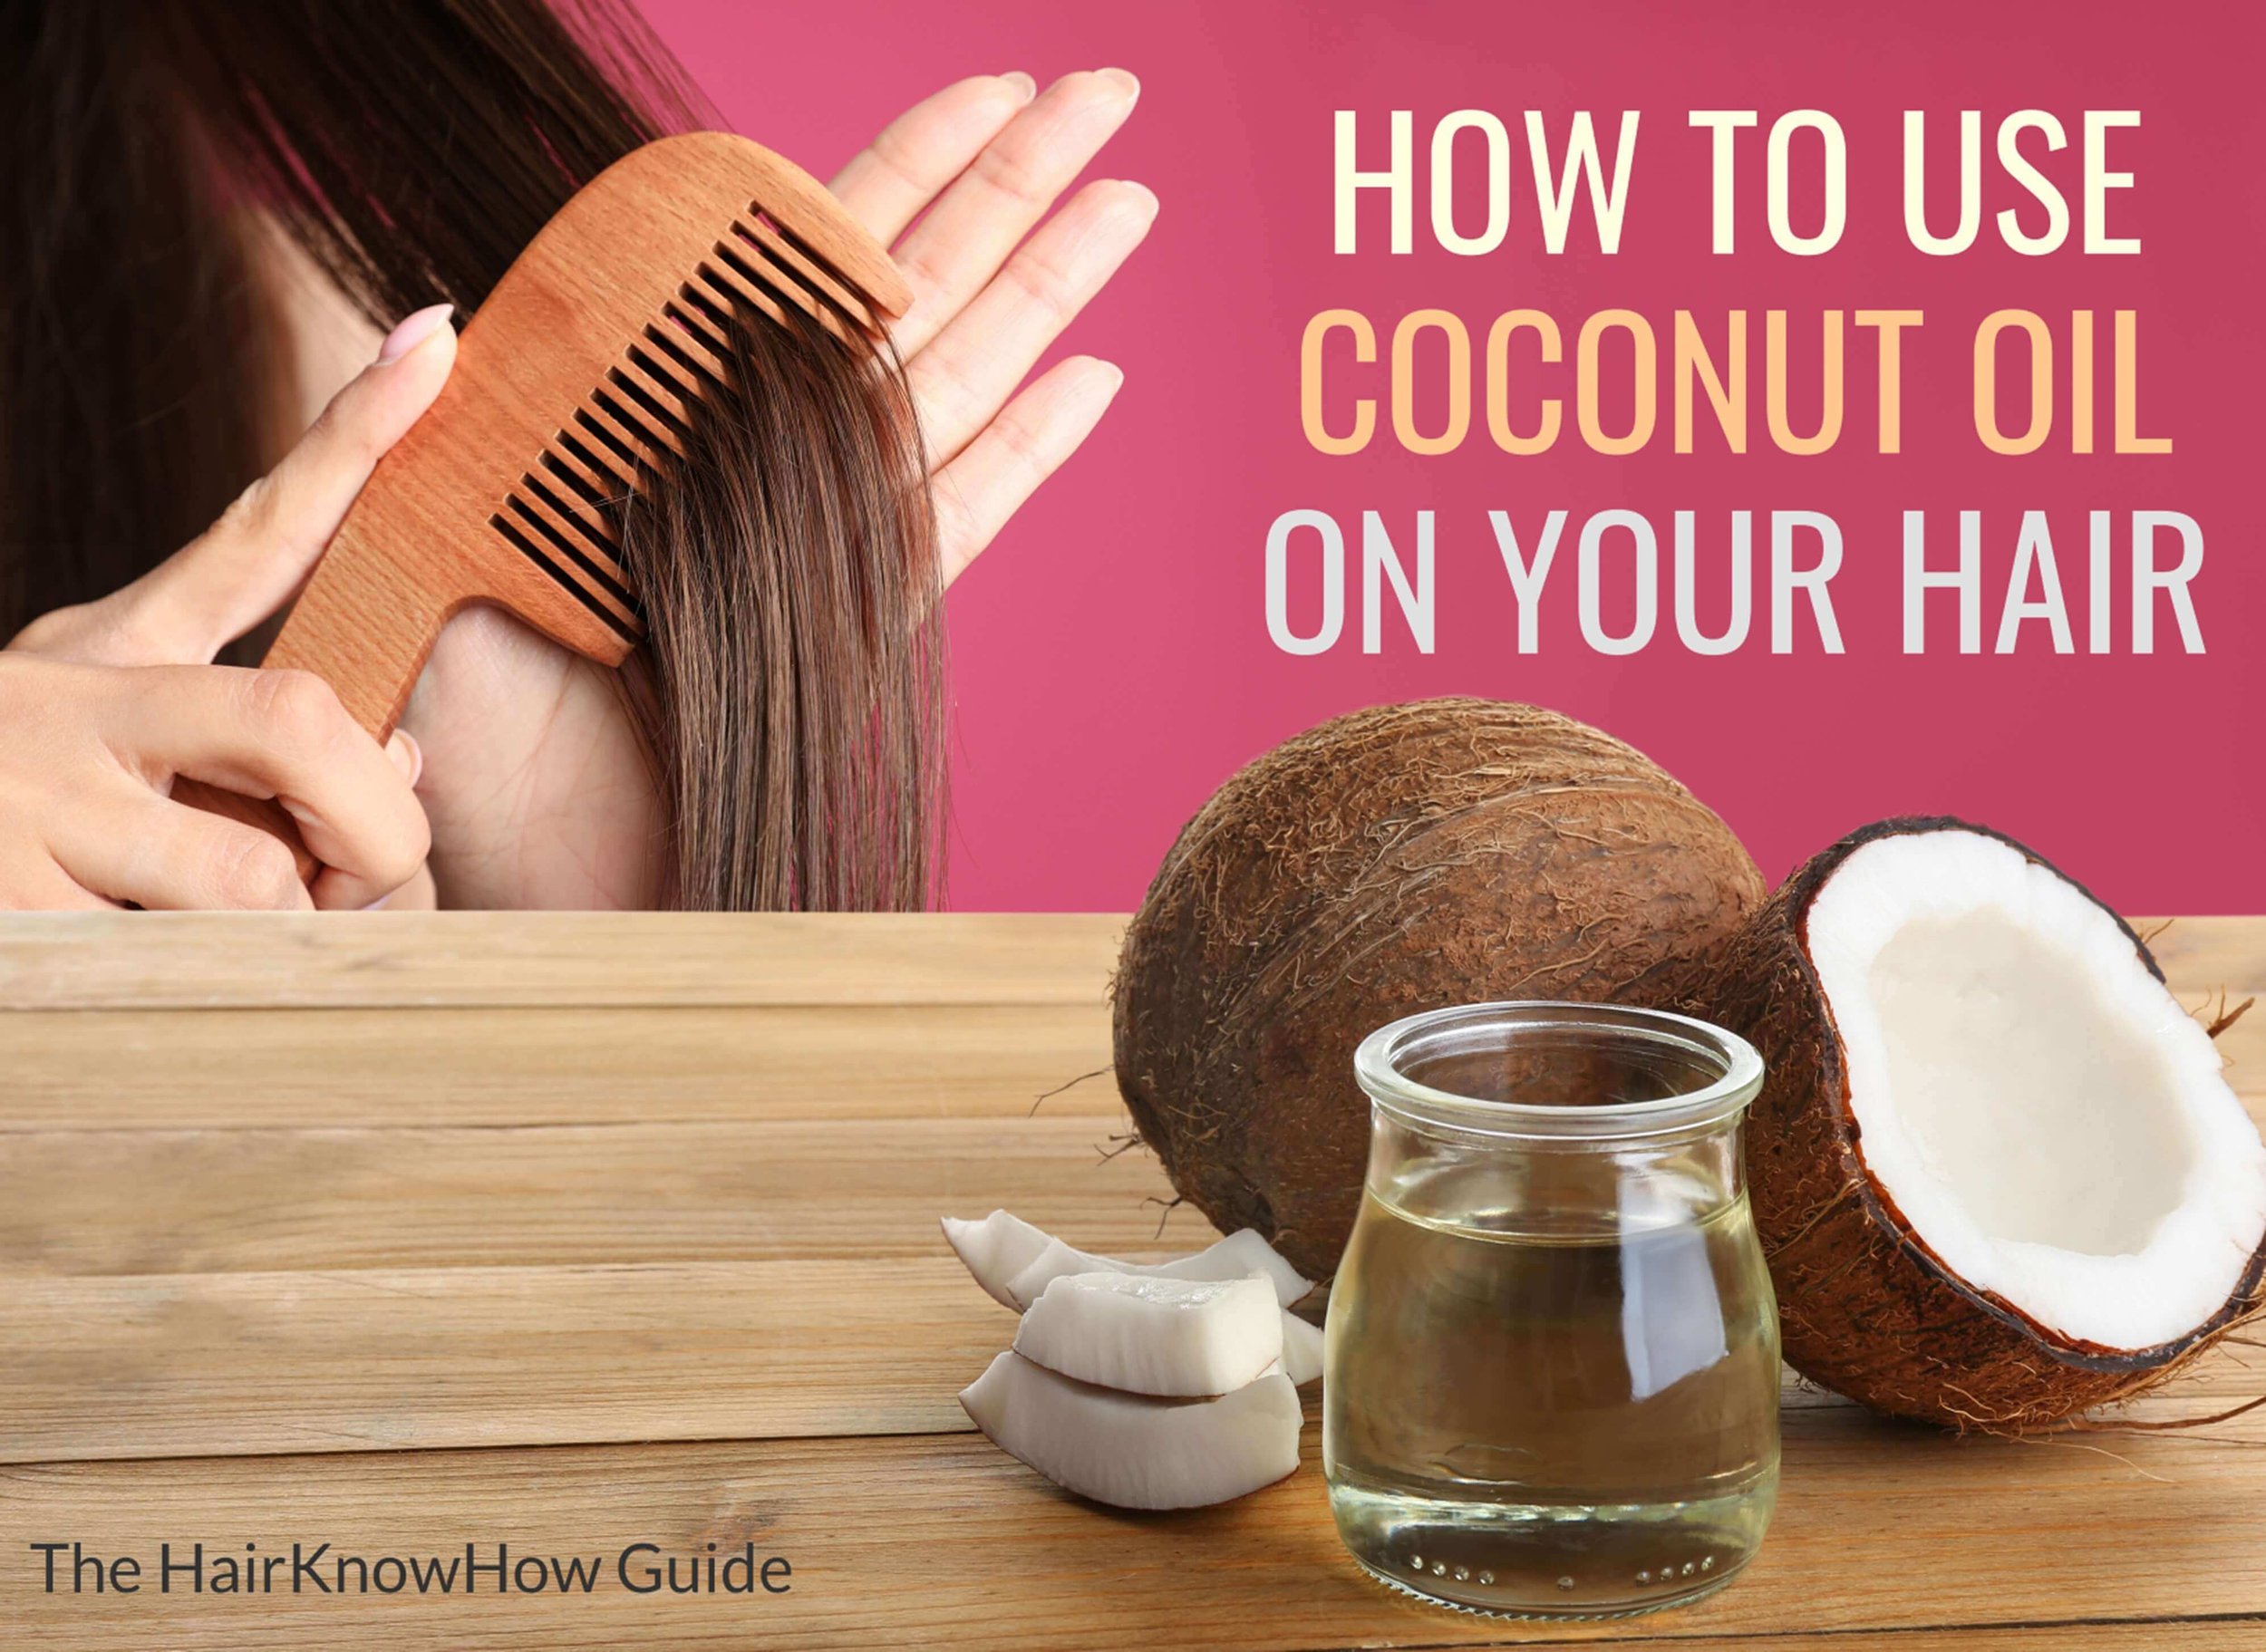 HairKnowHow - Find Out How To Use Coconut Oil On Your Hair —   Get Accurate Results with Our Professional Hair Test &  Analysis Services - Unlock Your Hair's True Potential